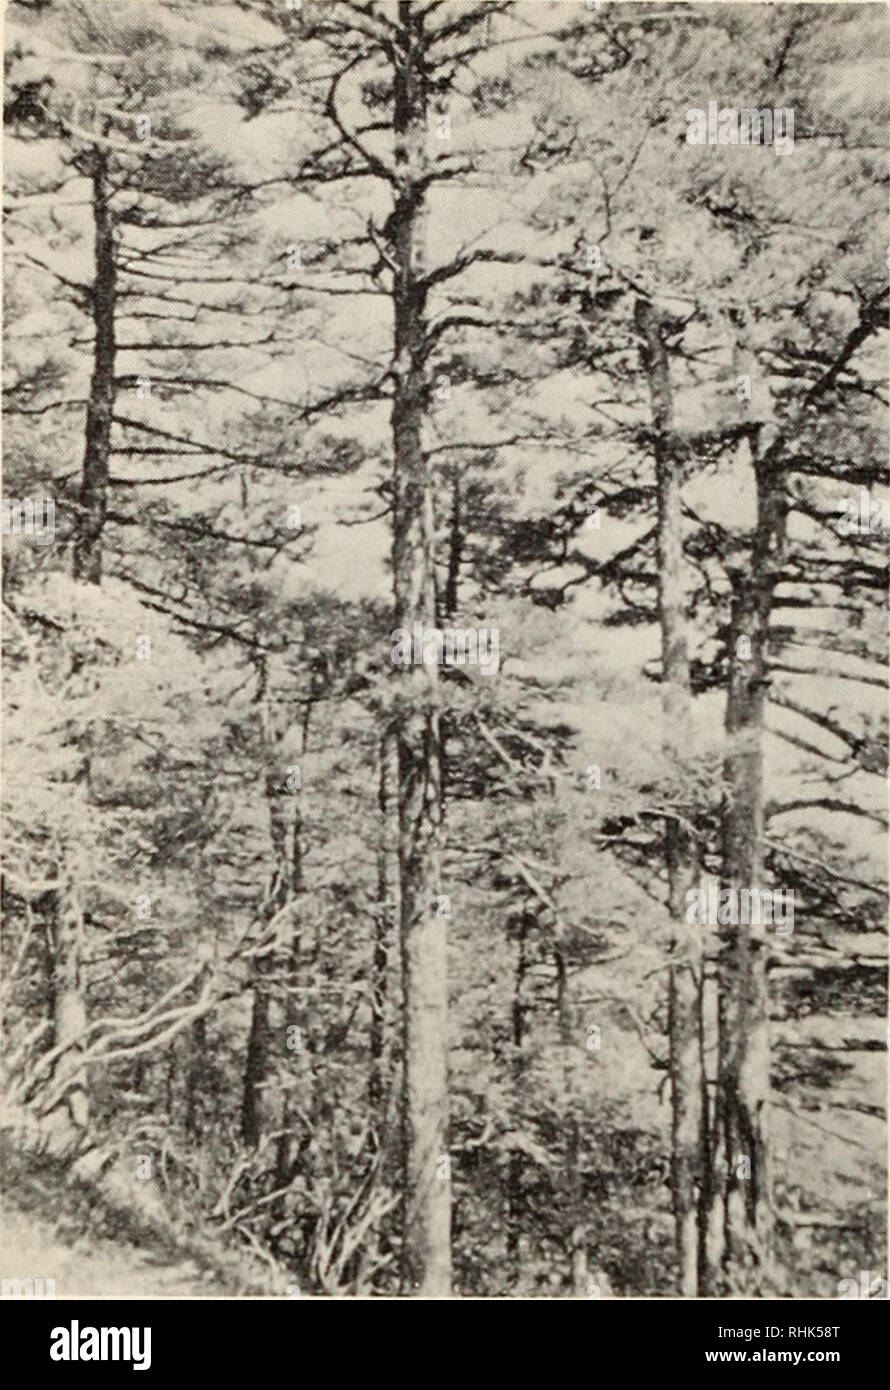 . Biology of rust resistance in forest trees : proceedings of a NATO-IUFRO advanced study institute, August 17-24, 1969. Trees; Pine; Trees; Rust diseases. 130 S. K. HYUN. Fig. 5. Pinus koraiensis-Pinus densiflora Sieb. $ Zucc. forest type on a dry west facing slope (Elev. 1,500 m, Mt. Chii, 35°N lat.). ^n SILVICULTURAL CHARACTERS P. koraiensis is typically a pyramidal straight tree around 40 m high and 1.50 m d.b.h. at 300 to 500 years. It is known as the finest tree of Korea for timber quality. Leaves are dark green, straight, and 6 to 12 cm long. Cones are short-stalked and 9 to 14 cm long. Stock Photo